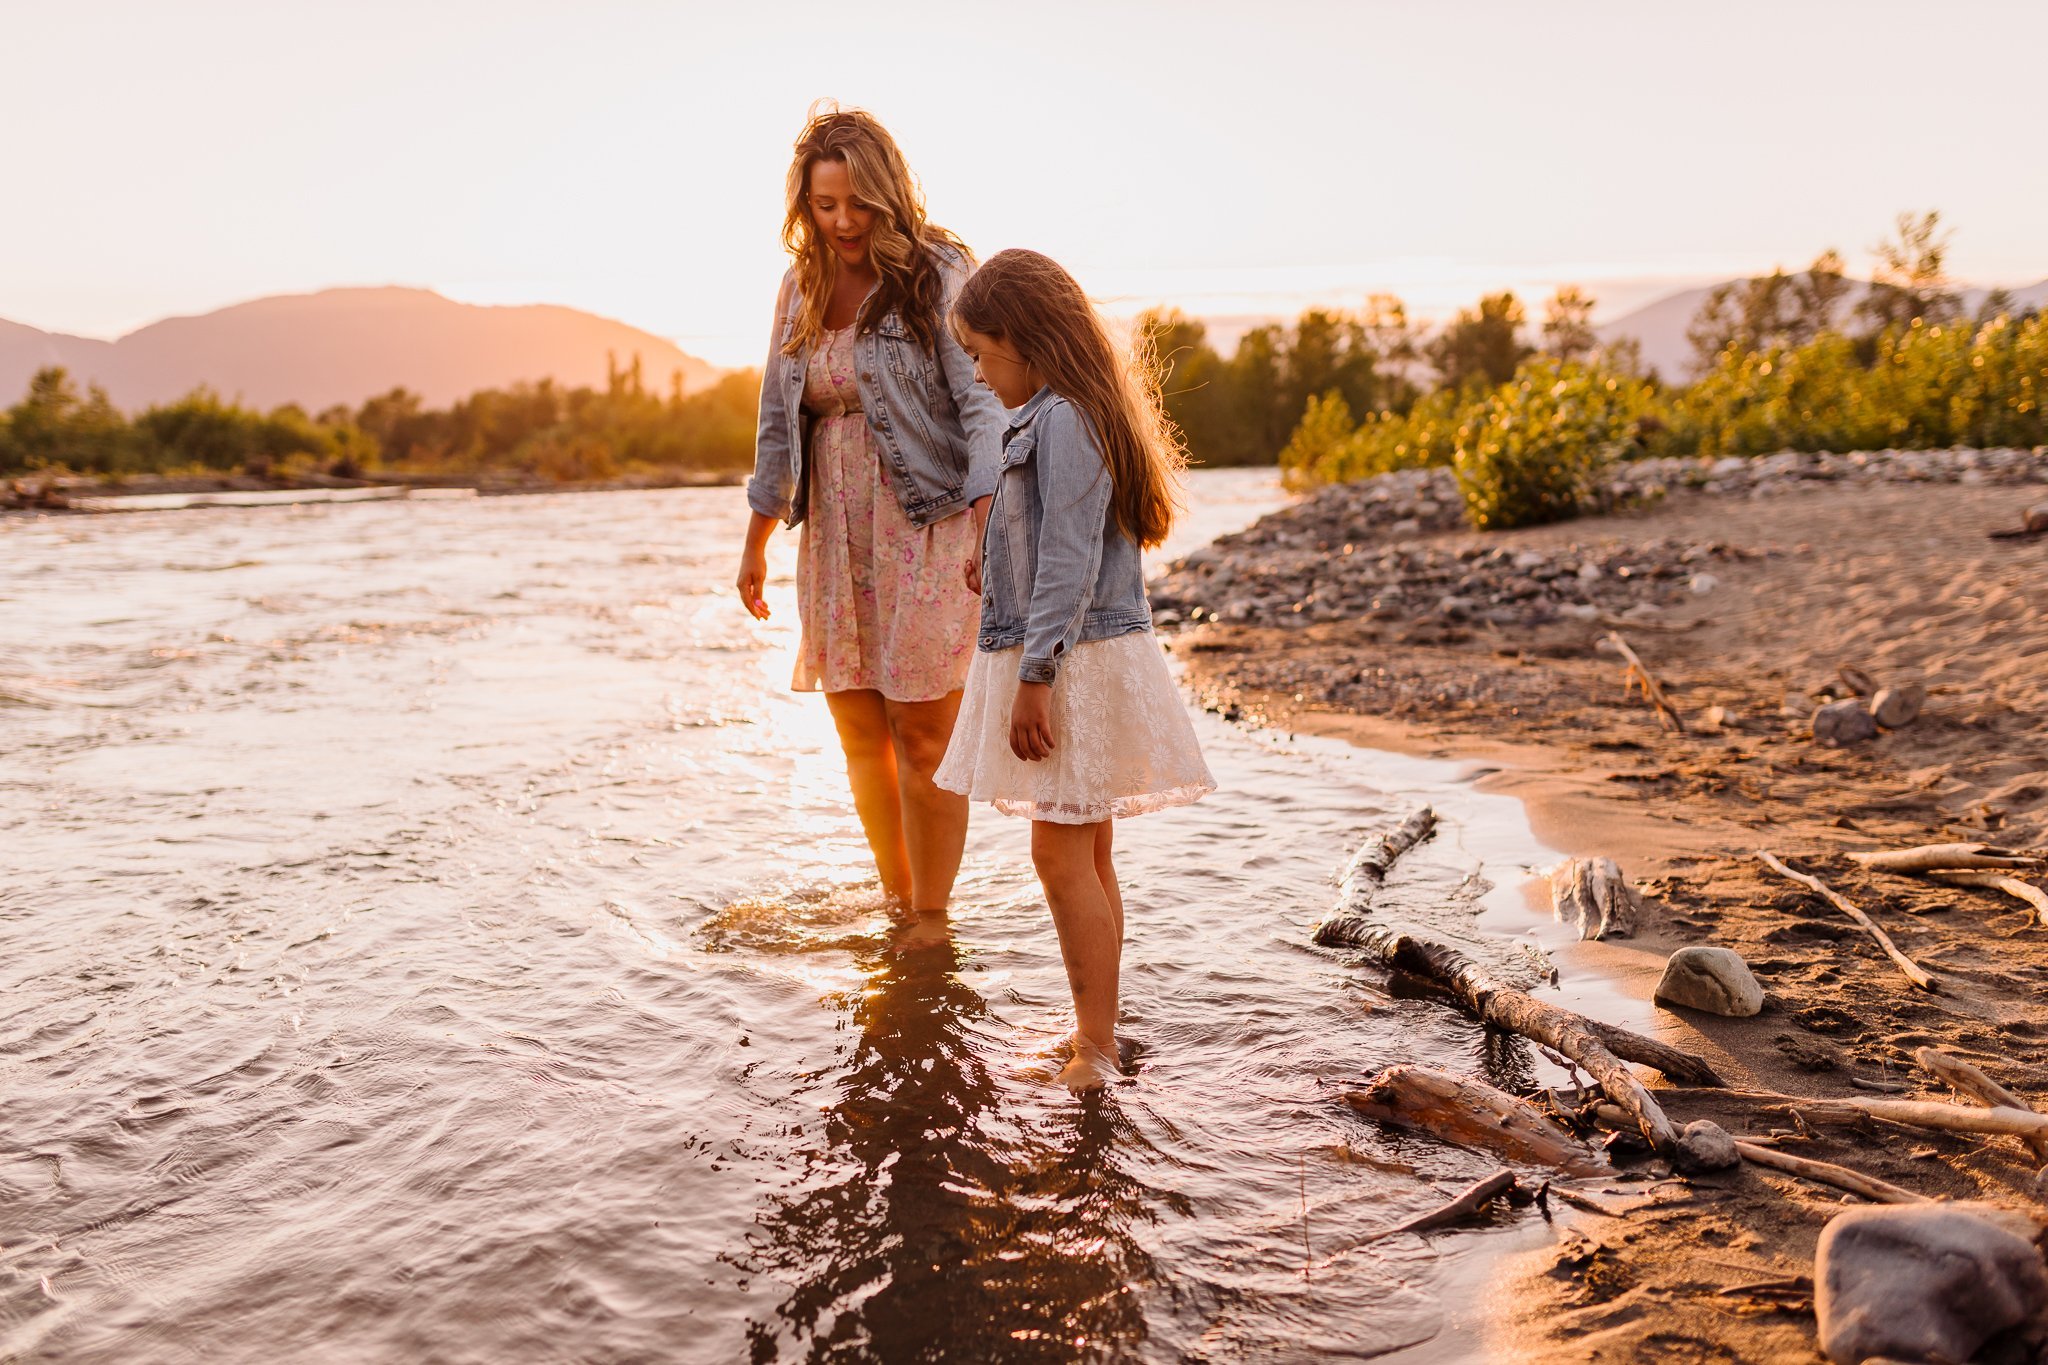 Vedder+River+Family+Session+-+Anna+Hurley+Photography++(30).jpg